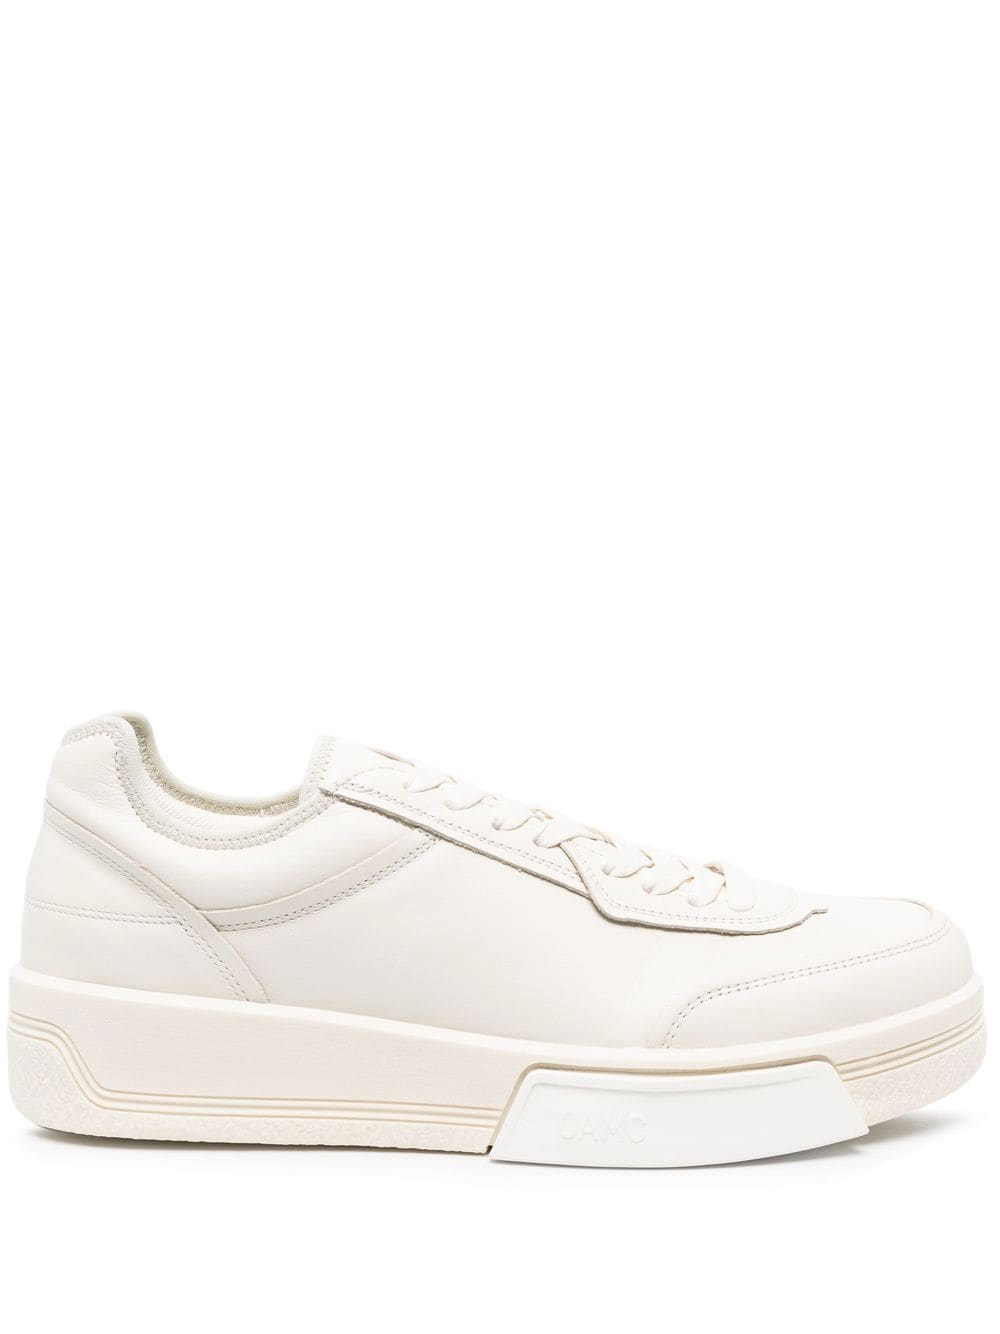 OAMC LEATHER LOW-TOP SNEAKERS